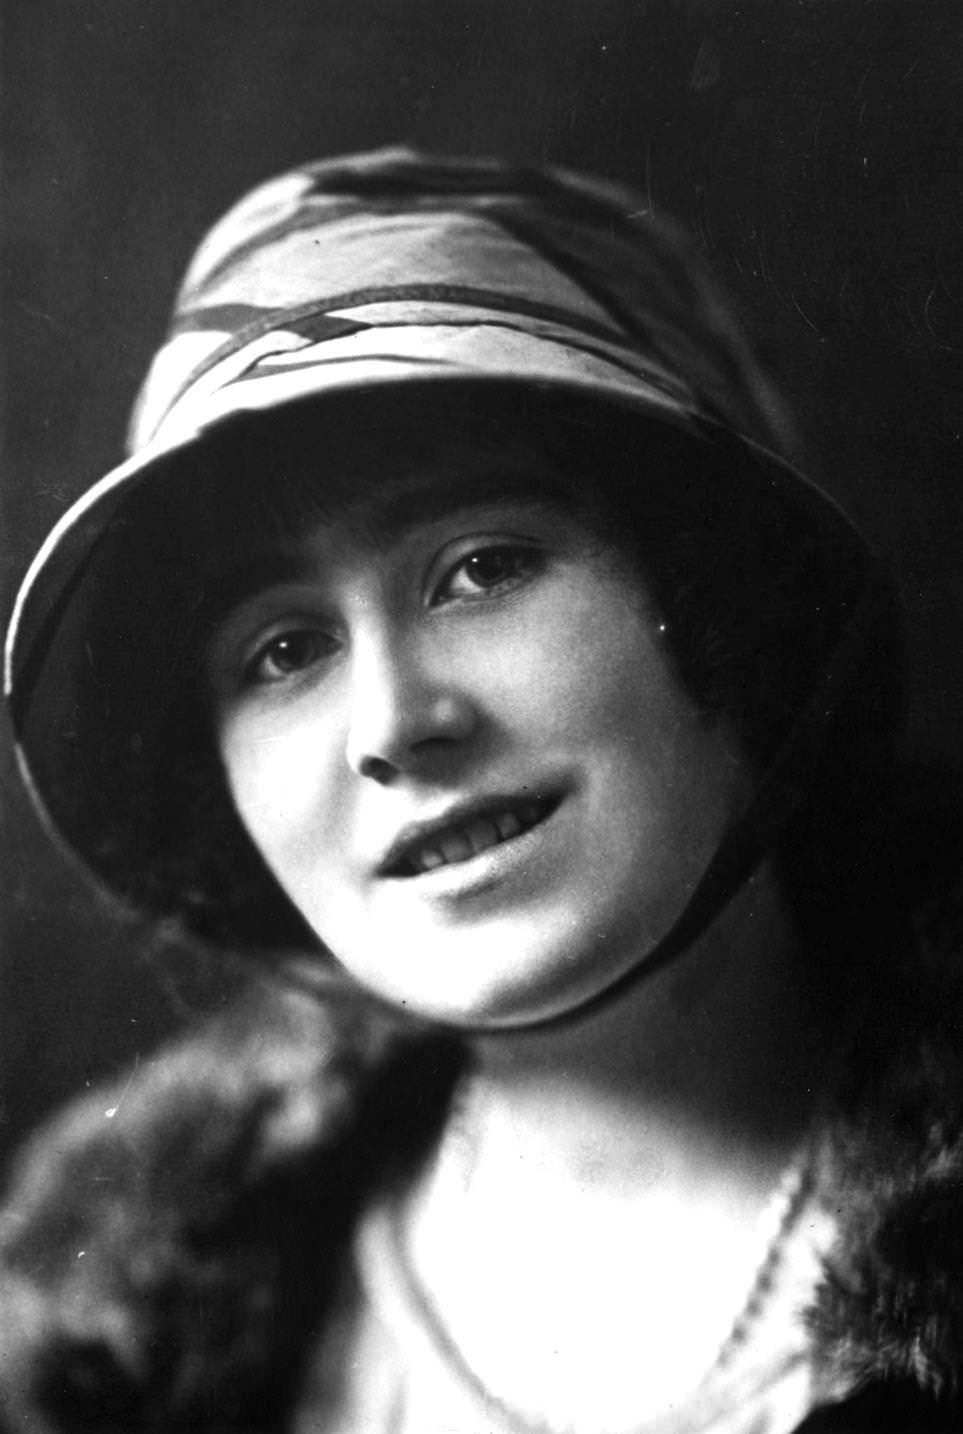 Future Queen Consort to King George VI, Lady Elizabeth Bowes Lyon in cloche hat, 1920